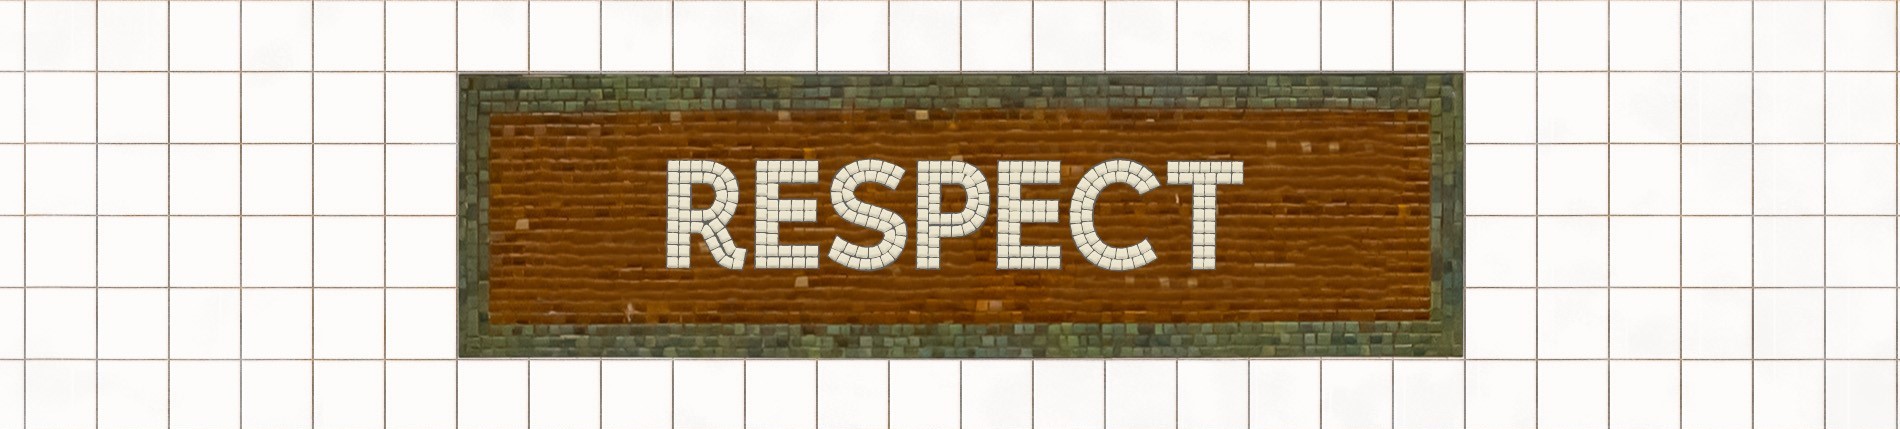 An illustration of a subway-style sign reading "Respect" on what looks like a subway wall